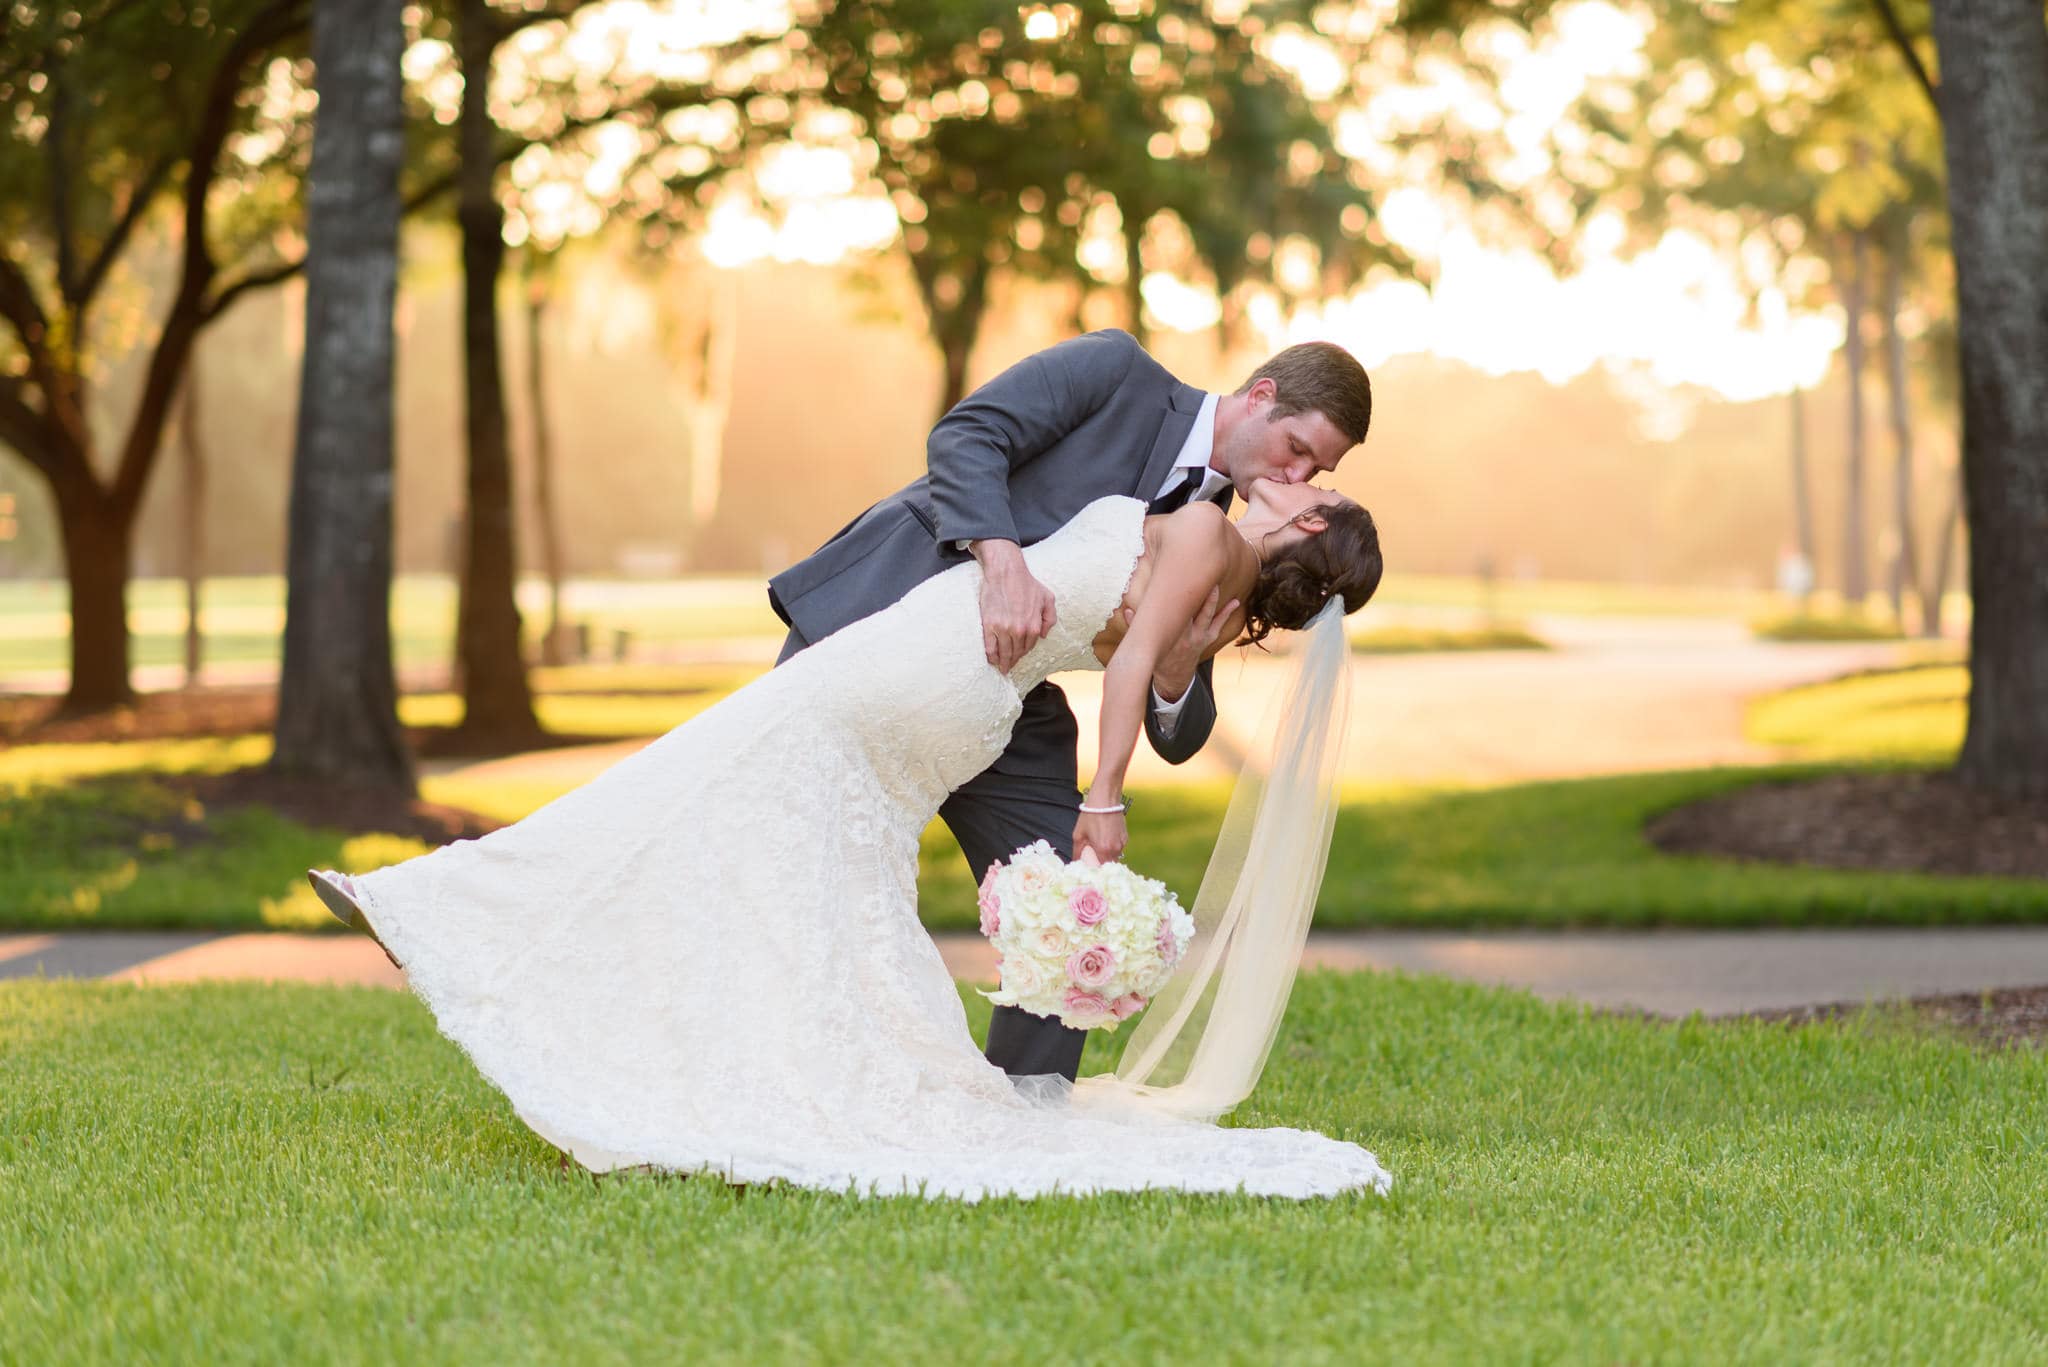 Dipping back bride for kiss backlit by sunset - Pawleys Plantation